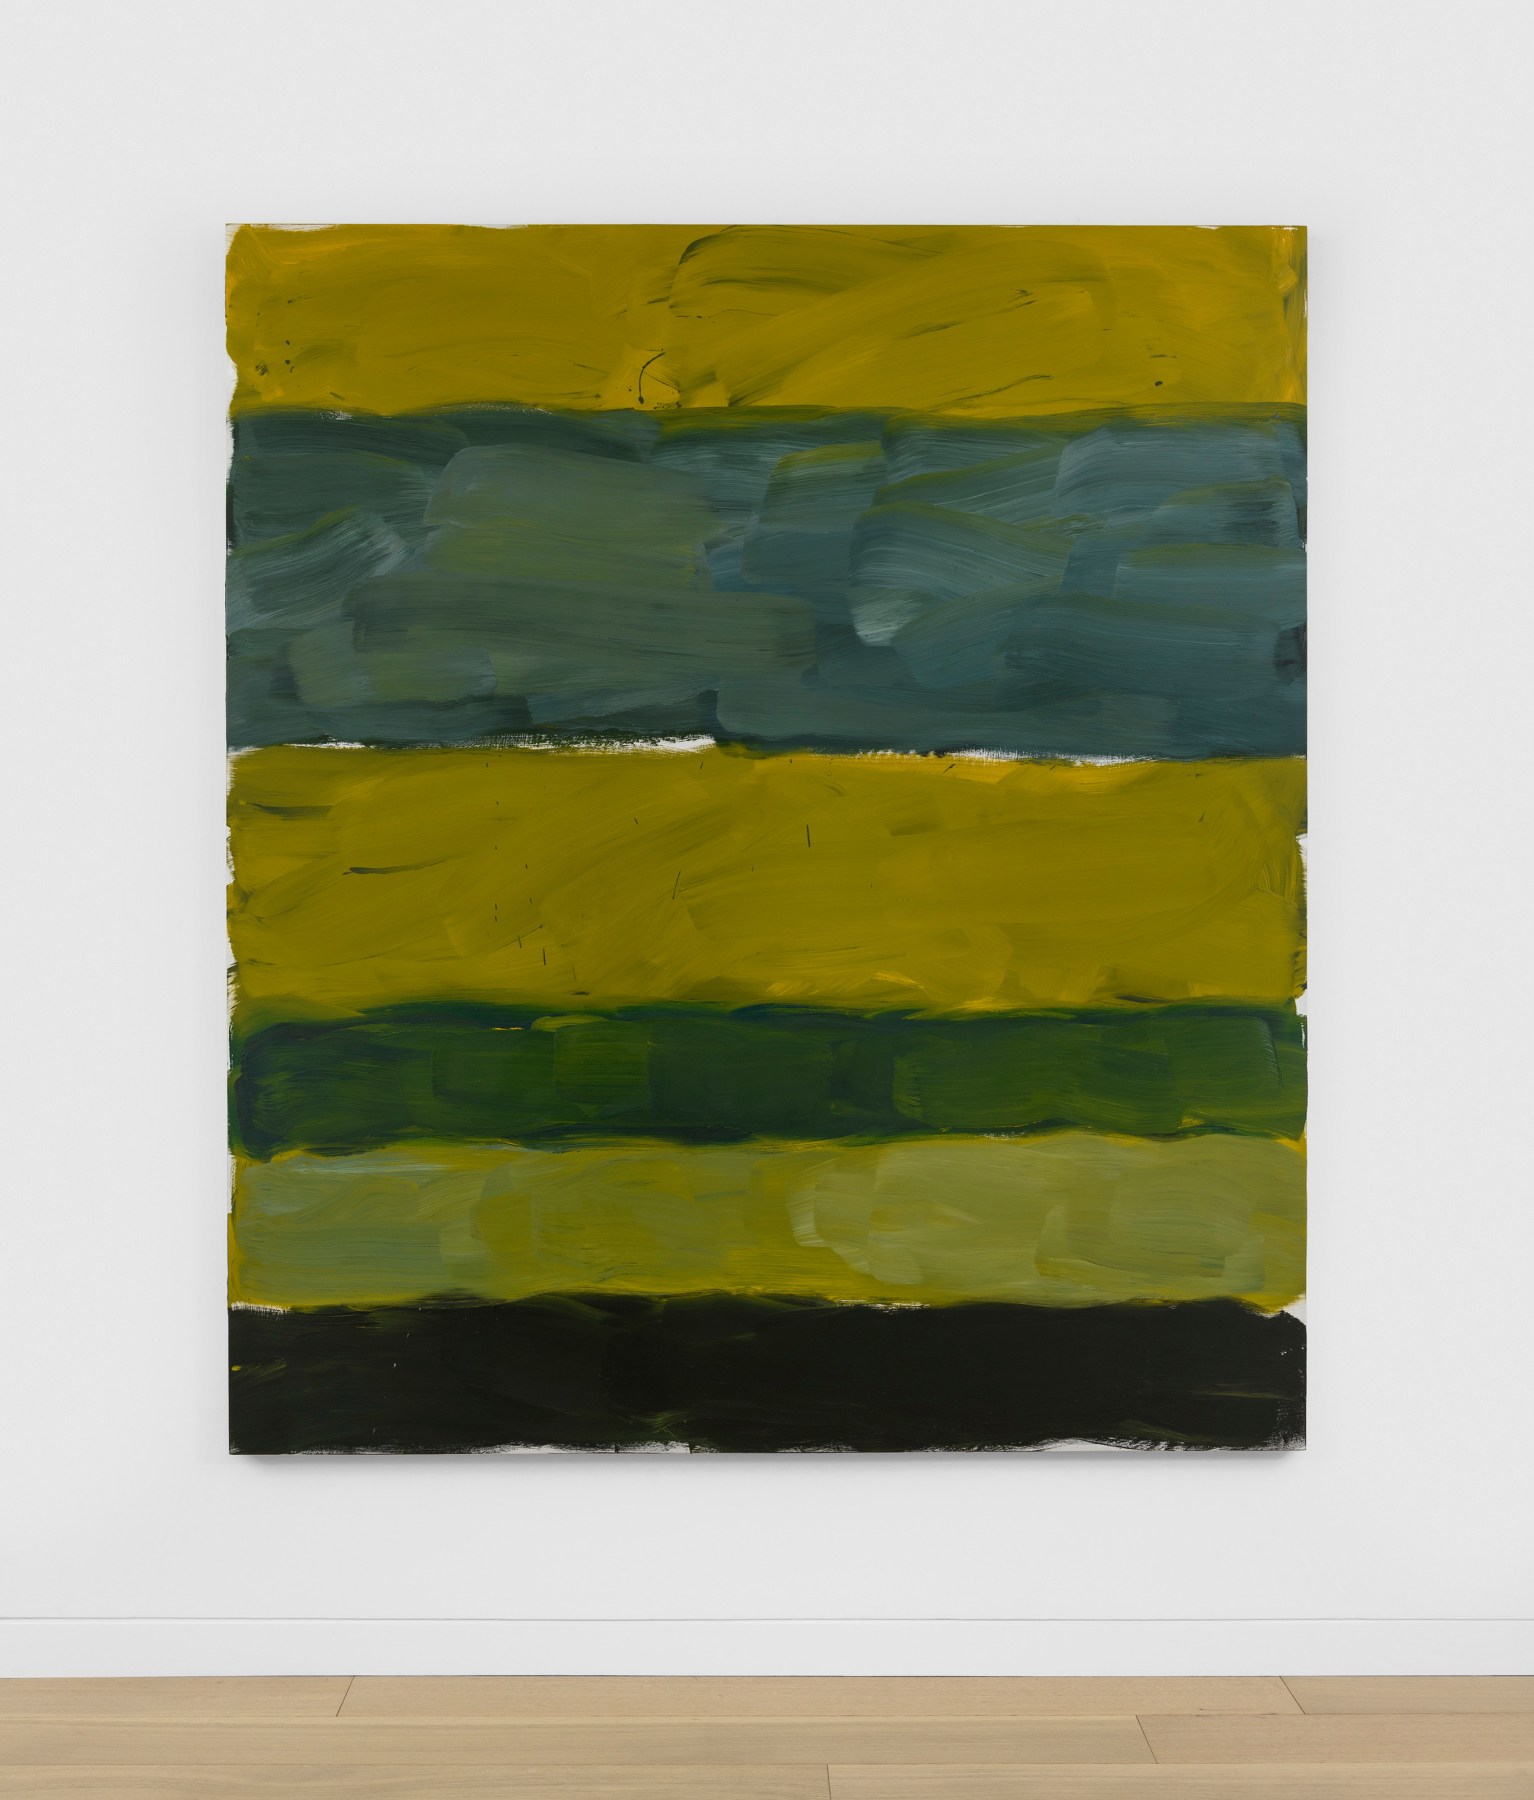 Sean Scully - Text